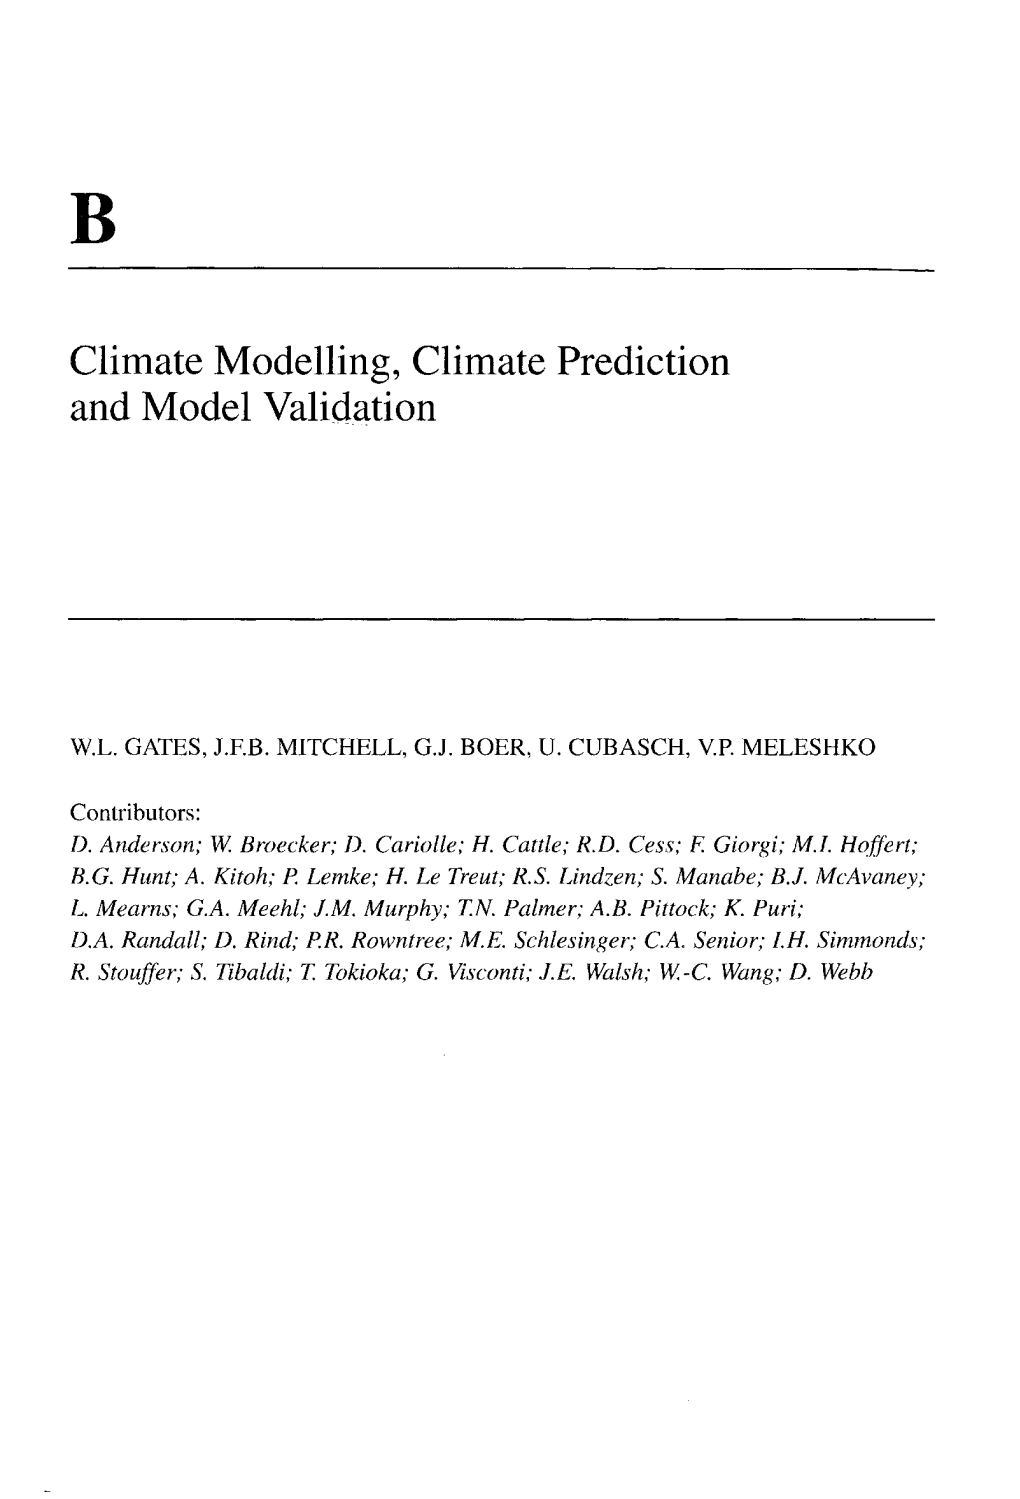 Climate Modelling, Climate Prediction and Model Validation